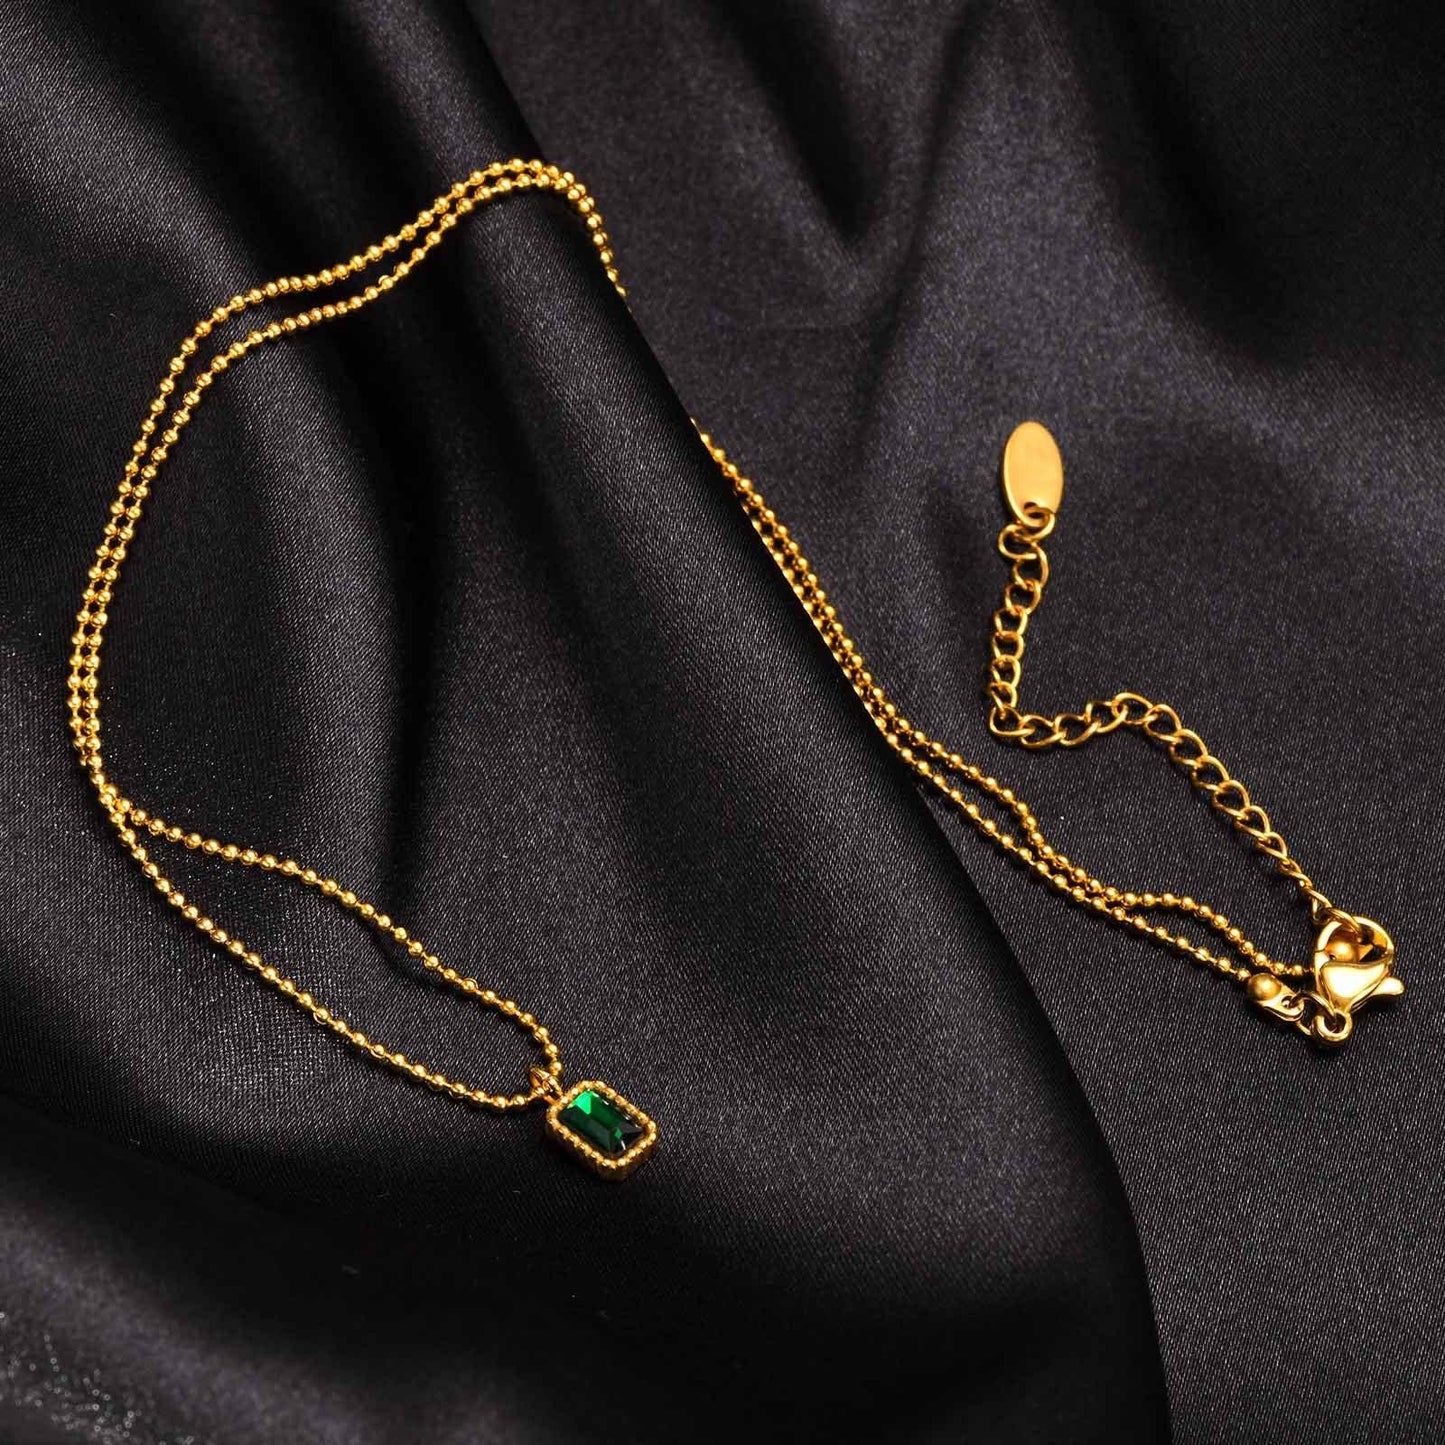 Non-fading green pendant ins style women's necklace